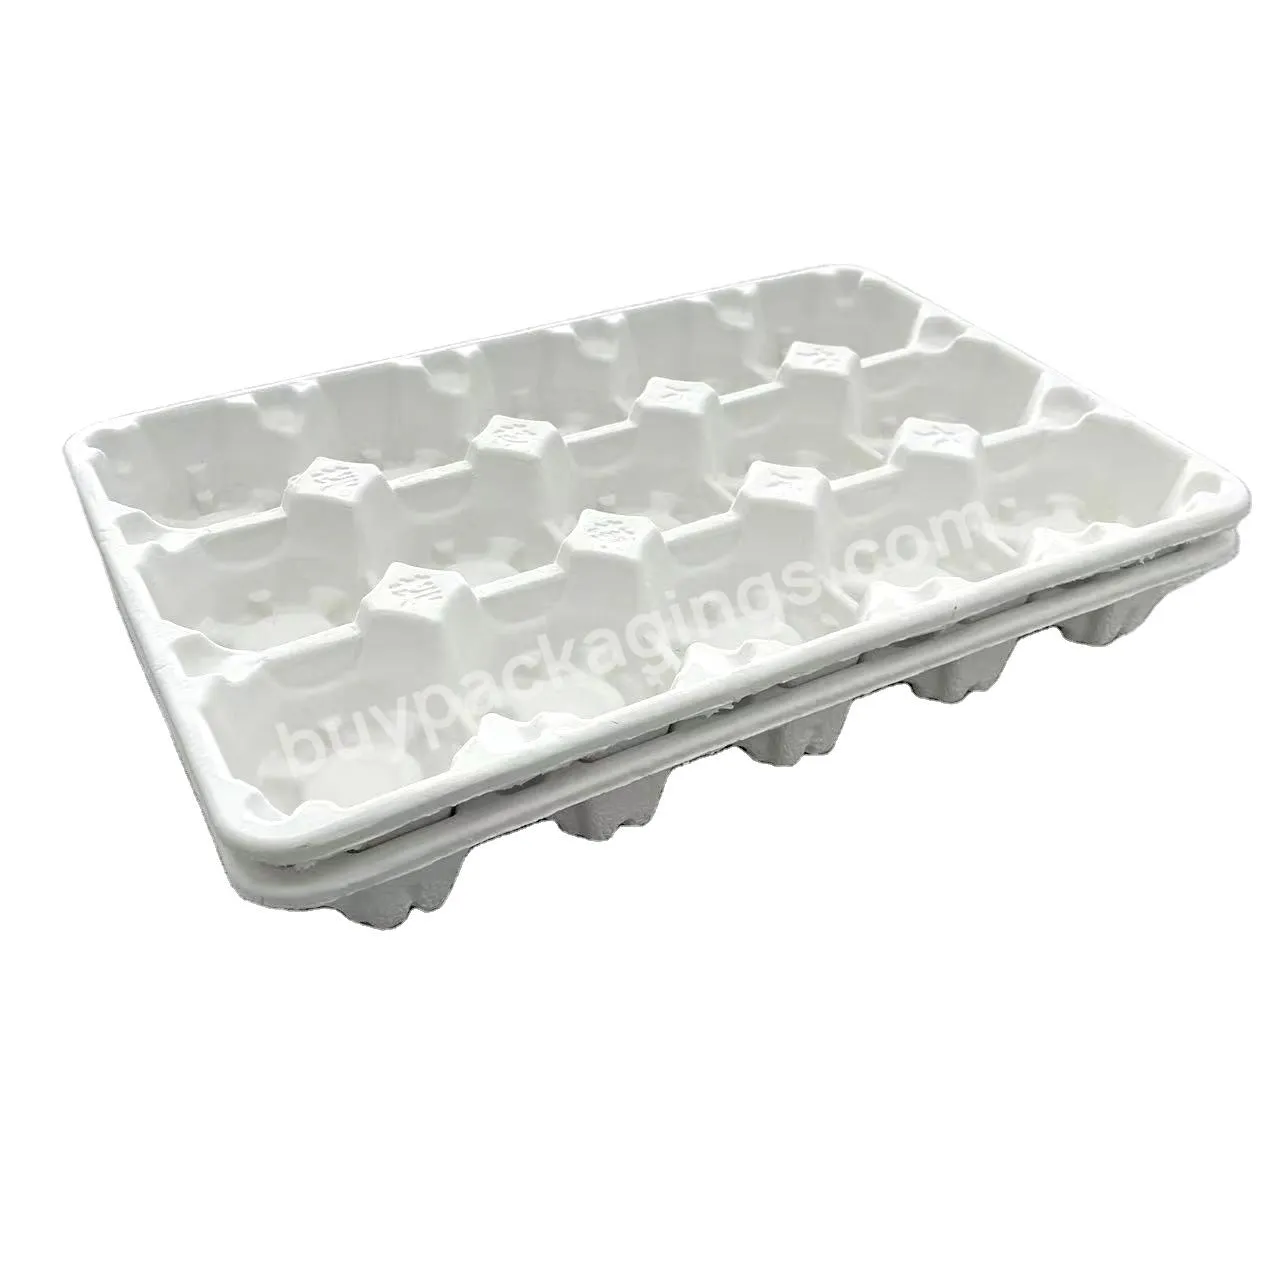 Custom Disposable Biodegradable Paper Products Packaging Pulp Shipping 15 Cell Fiber Bottle Carton Trays - Buy Custom Disposable Packaging,Pulp Shipping Trays,Biodegradable 15 Cell Fiber Bottle Carton Tray.